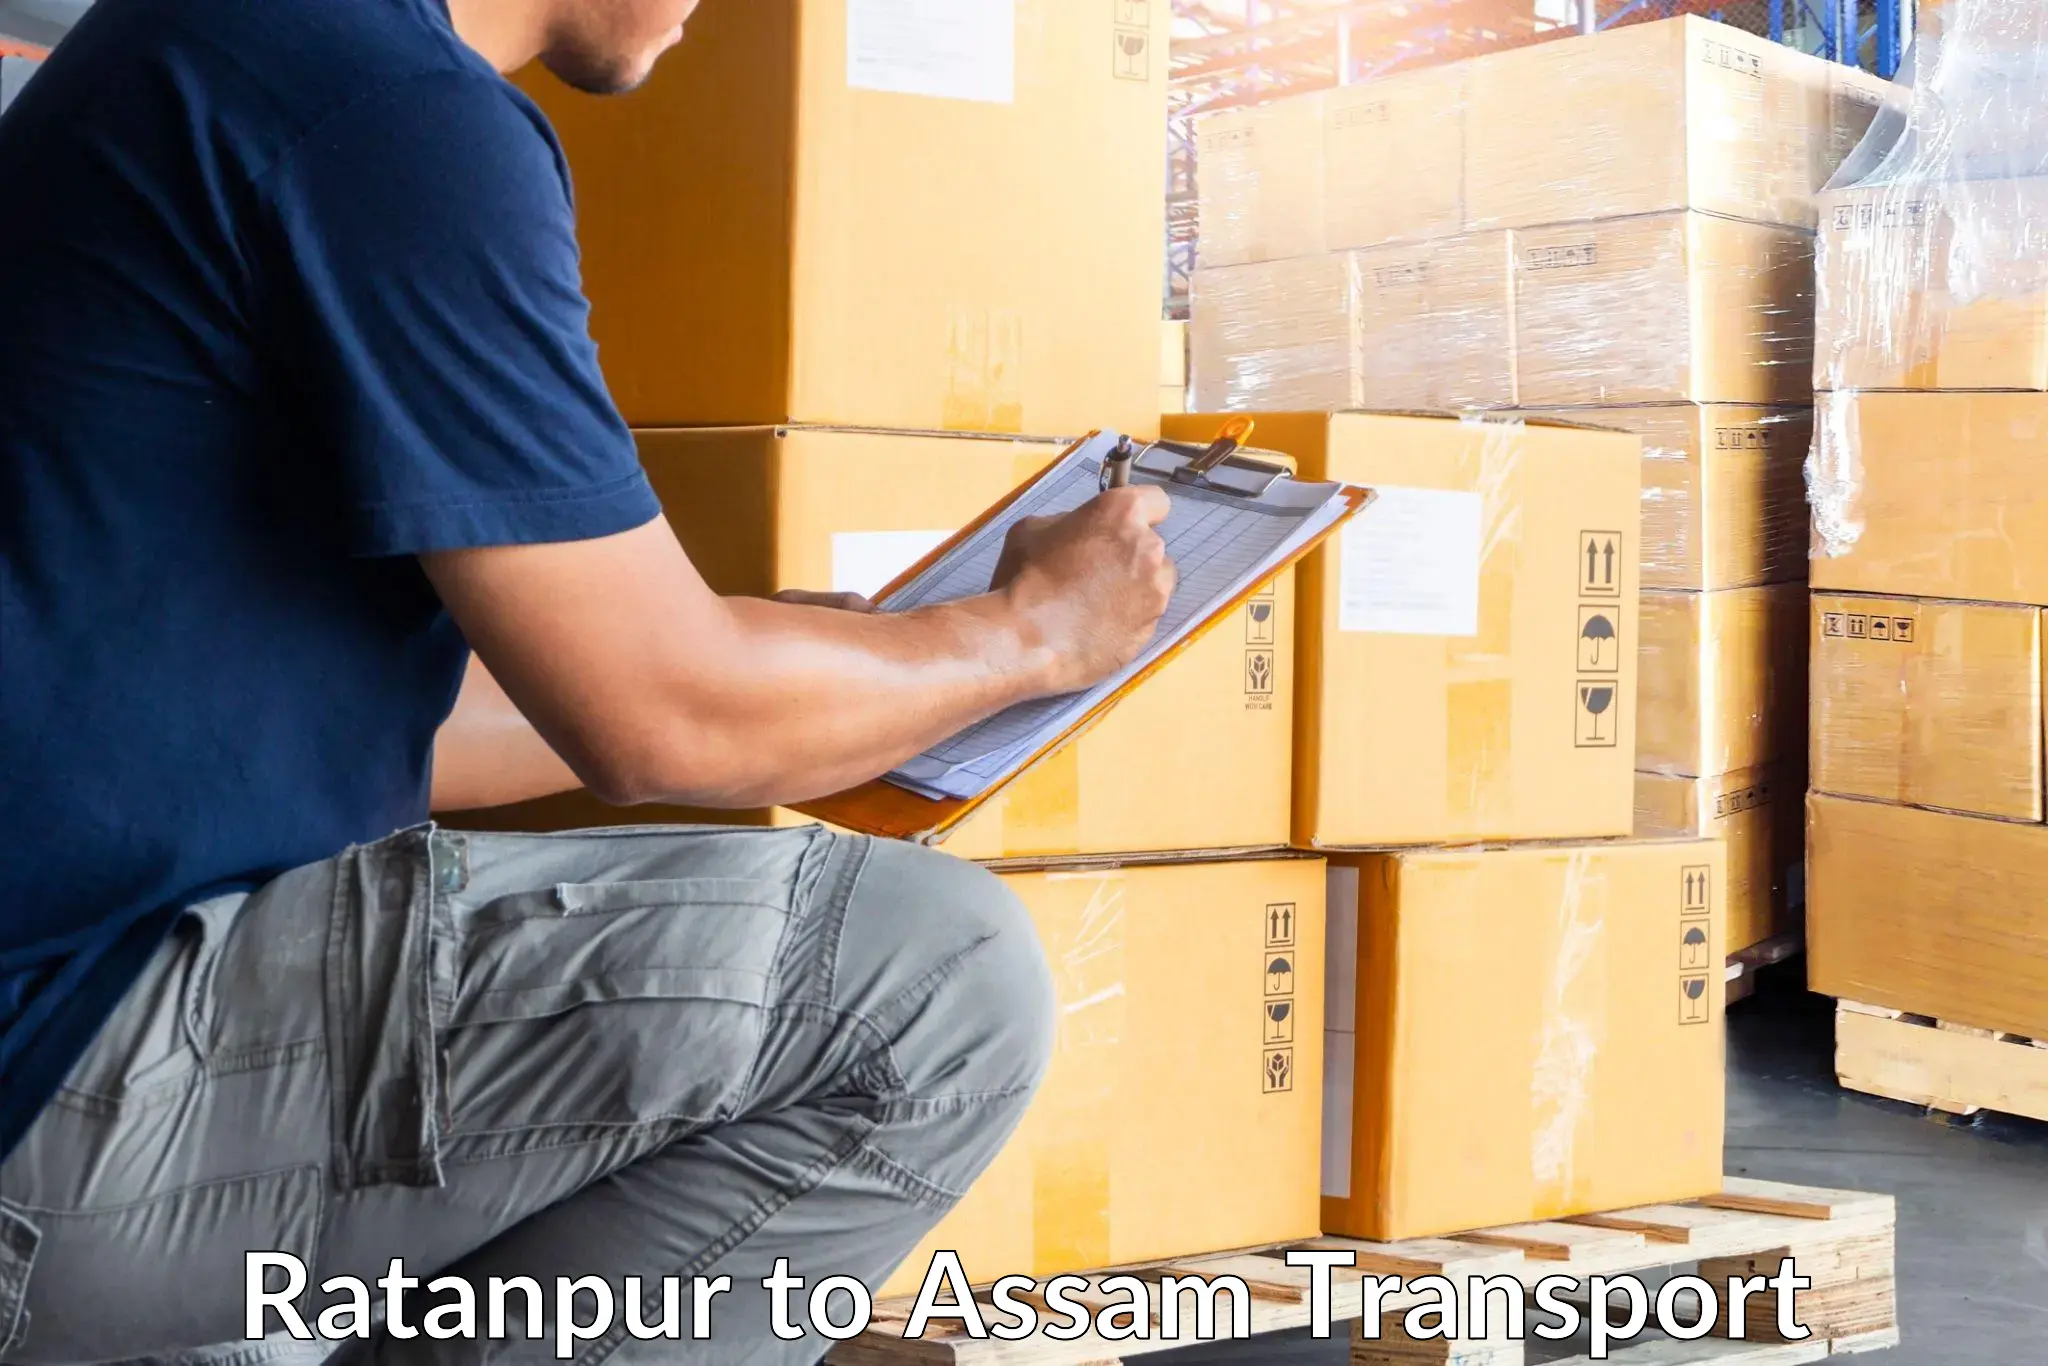 Cargo transport services Ratanpur to Kamrup